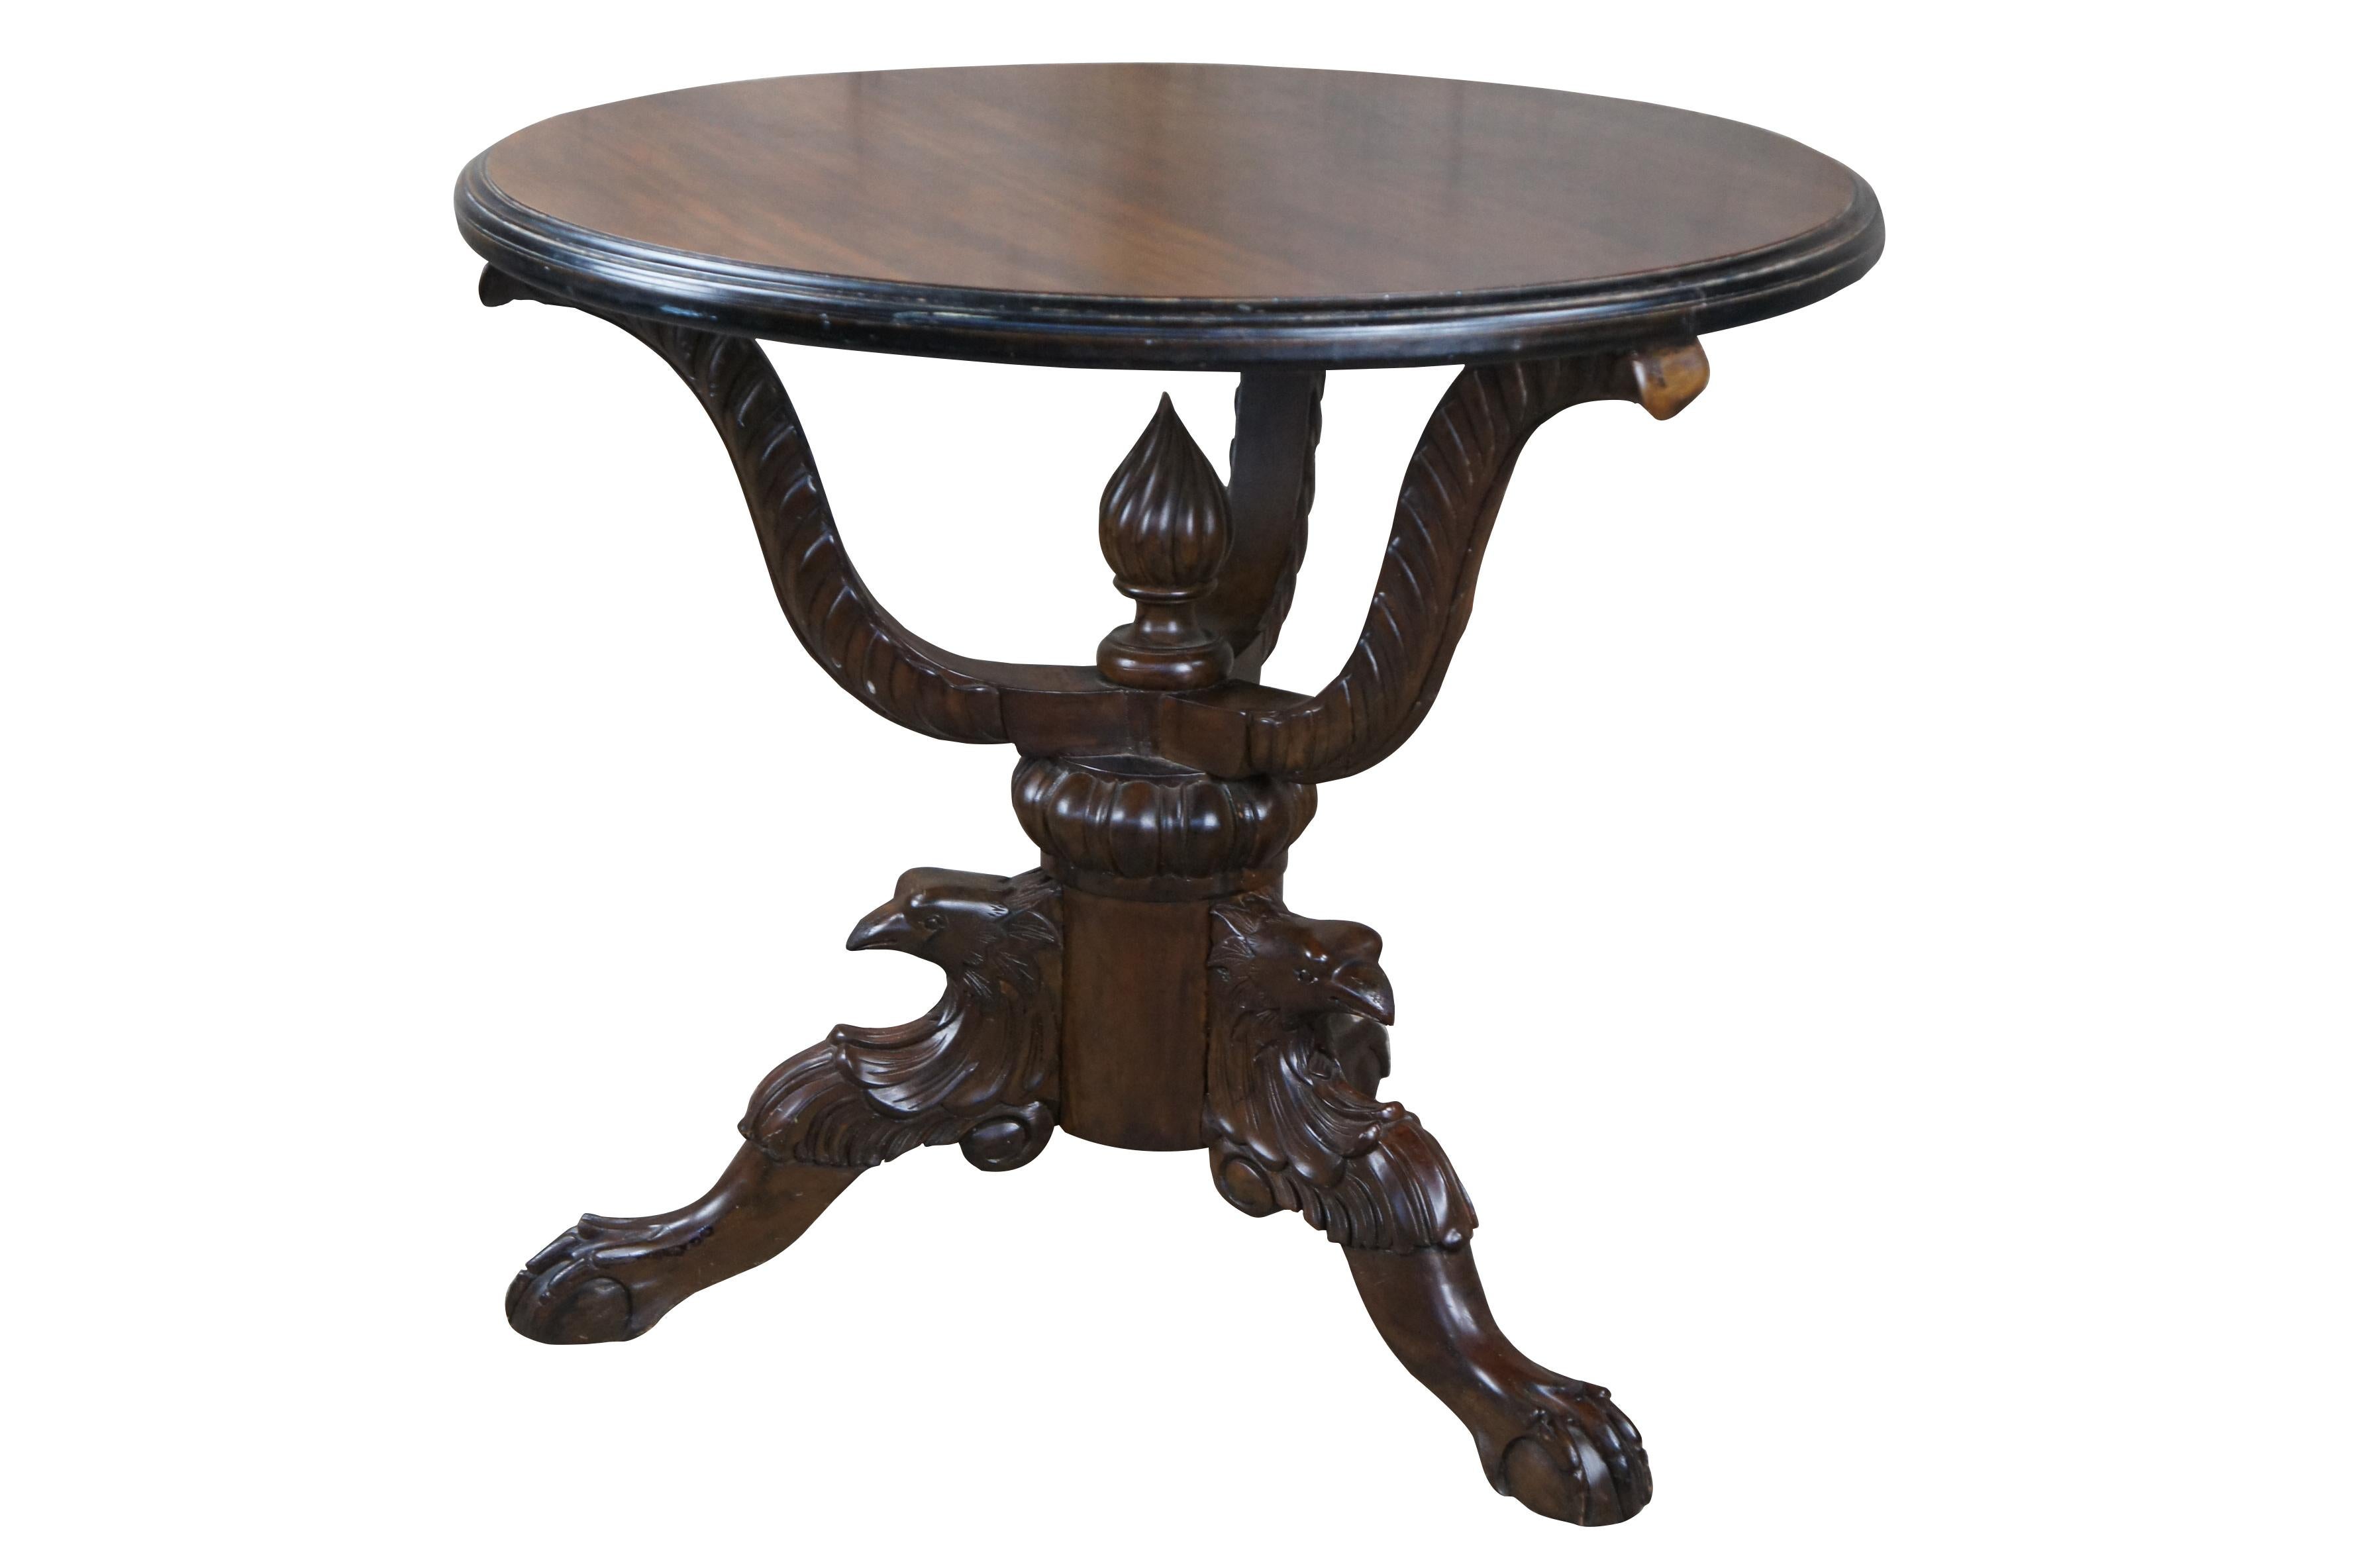 American Empire carved mahogany parlor table featuring round form with tri foot carved eagle legs over ball & claw feet with elaborate serpentine support and center finial. 

Dimensions:
31.5